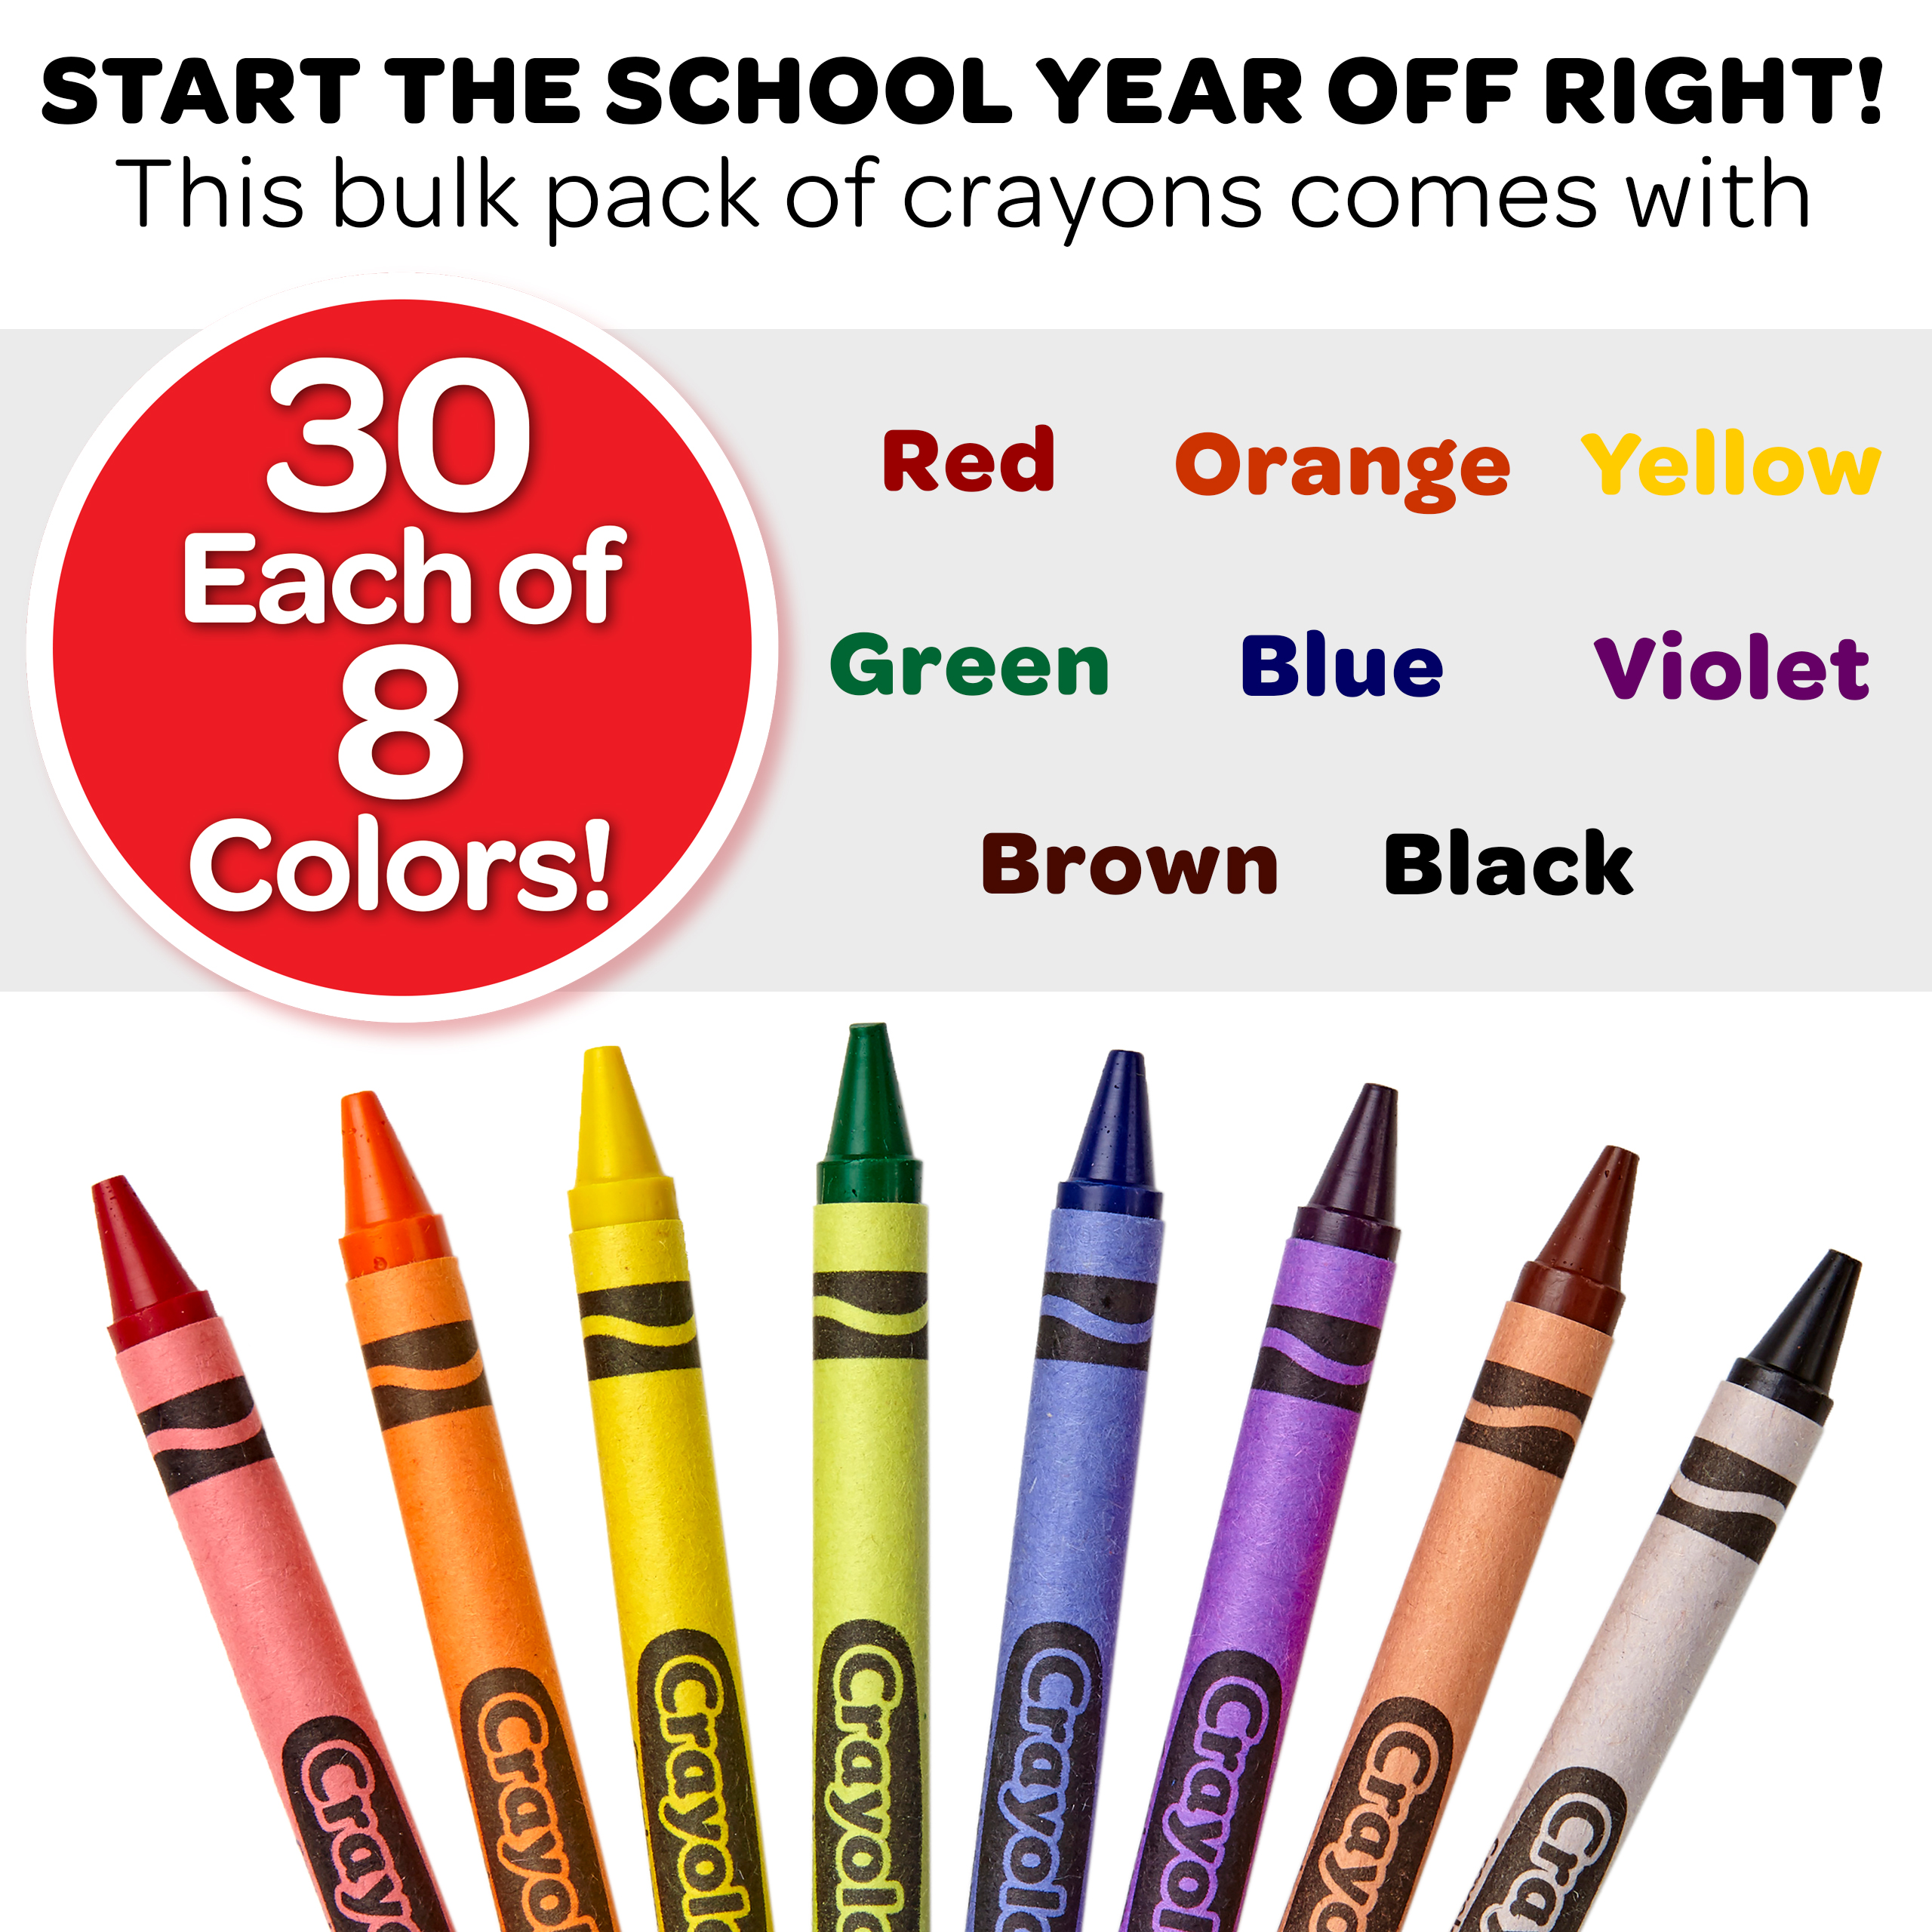 Crayola Classroom Set Crayons, 240 Ct, Teacher Supplies & Gifts, Classroom Supplies, Assorted Colors - image 3 of 9